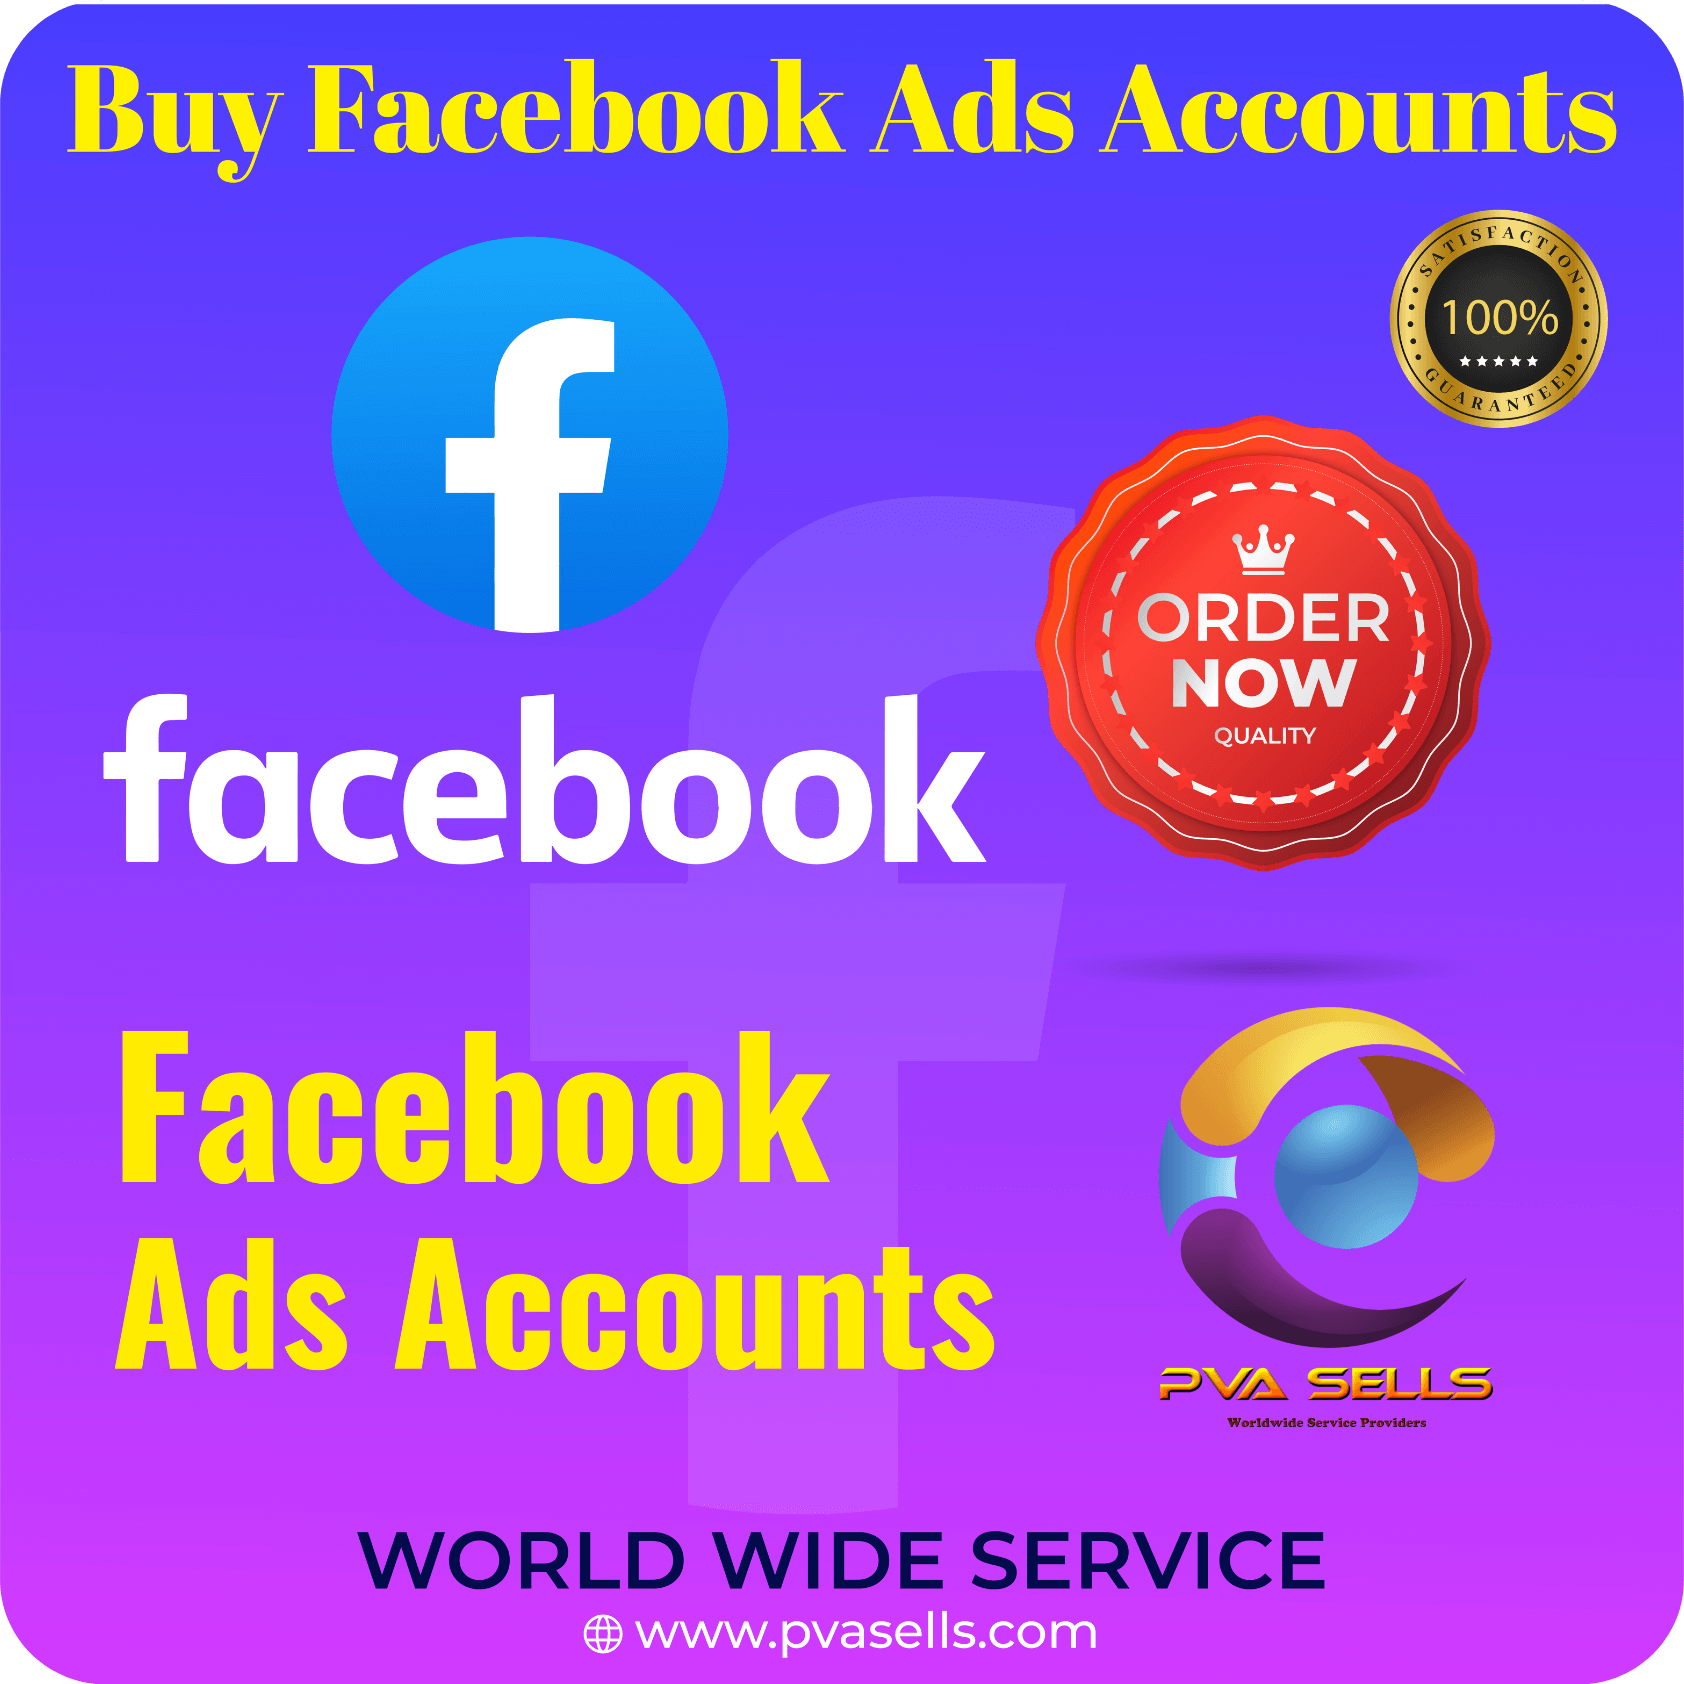 Buy Facebook Ads Accounts - 100% Safe & Verified Business Manager...